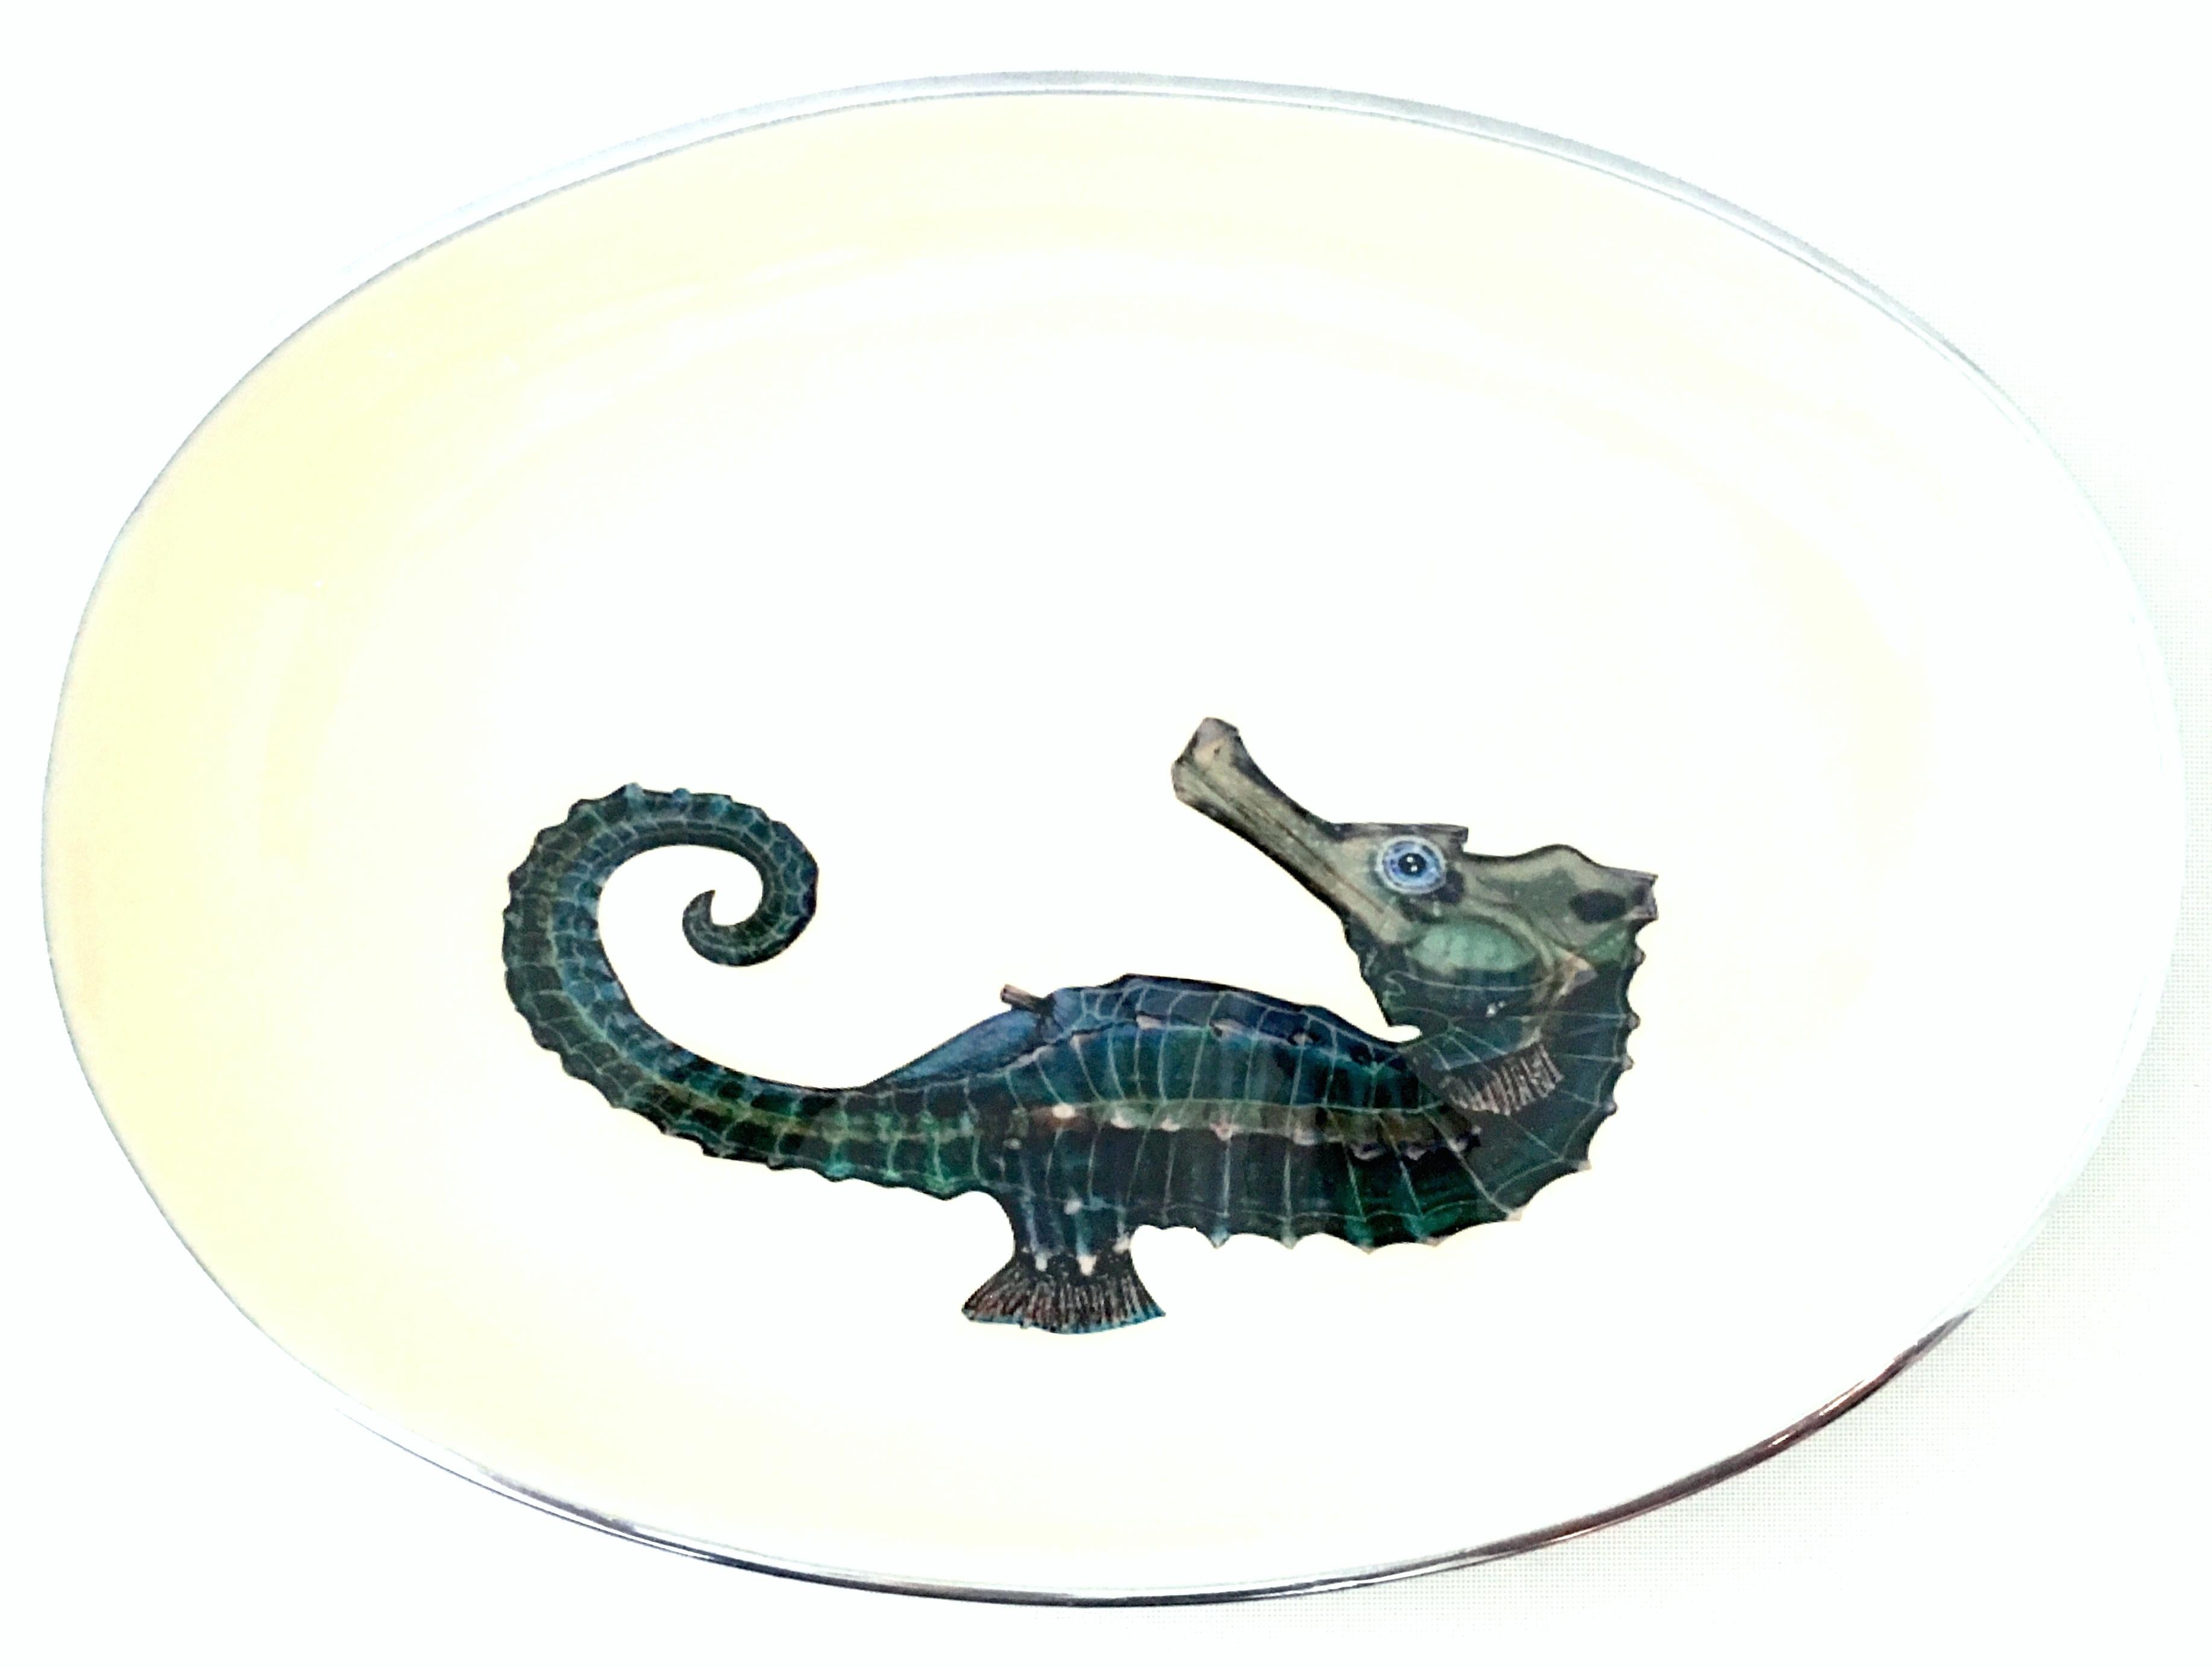 21st Century silver & enamel sea horse motif oval bowl. This multi purpose decorative or serving bowl features, a substantial weighted aluminum base with a enamel hand painted sea horse motif in shades of green, teal and brown on a creamy yellow